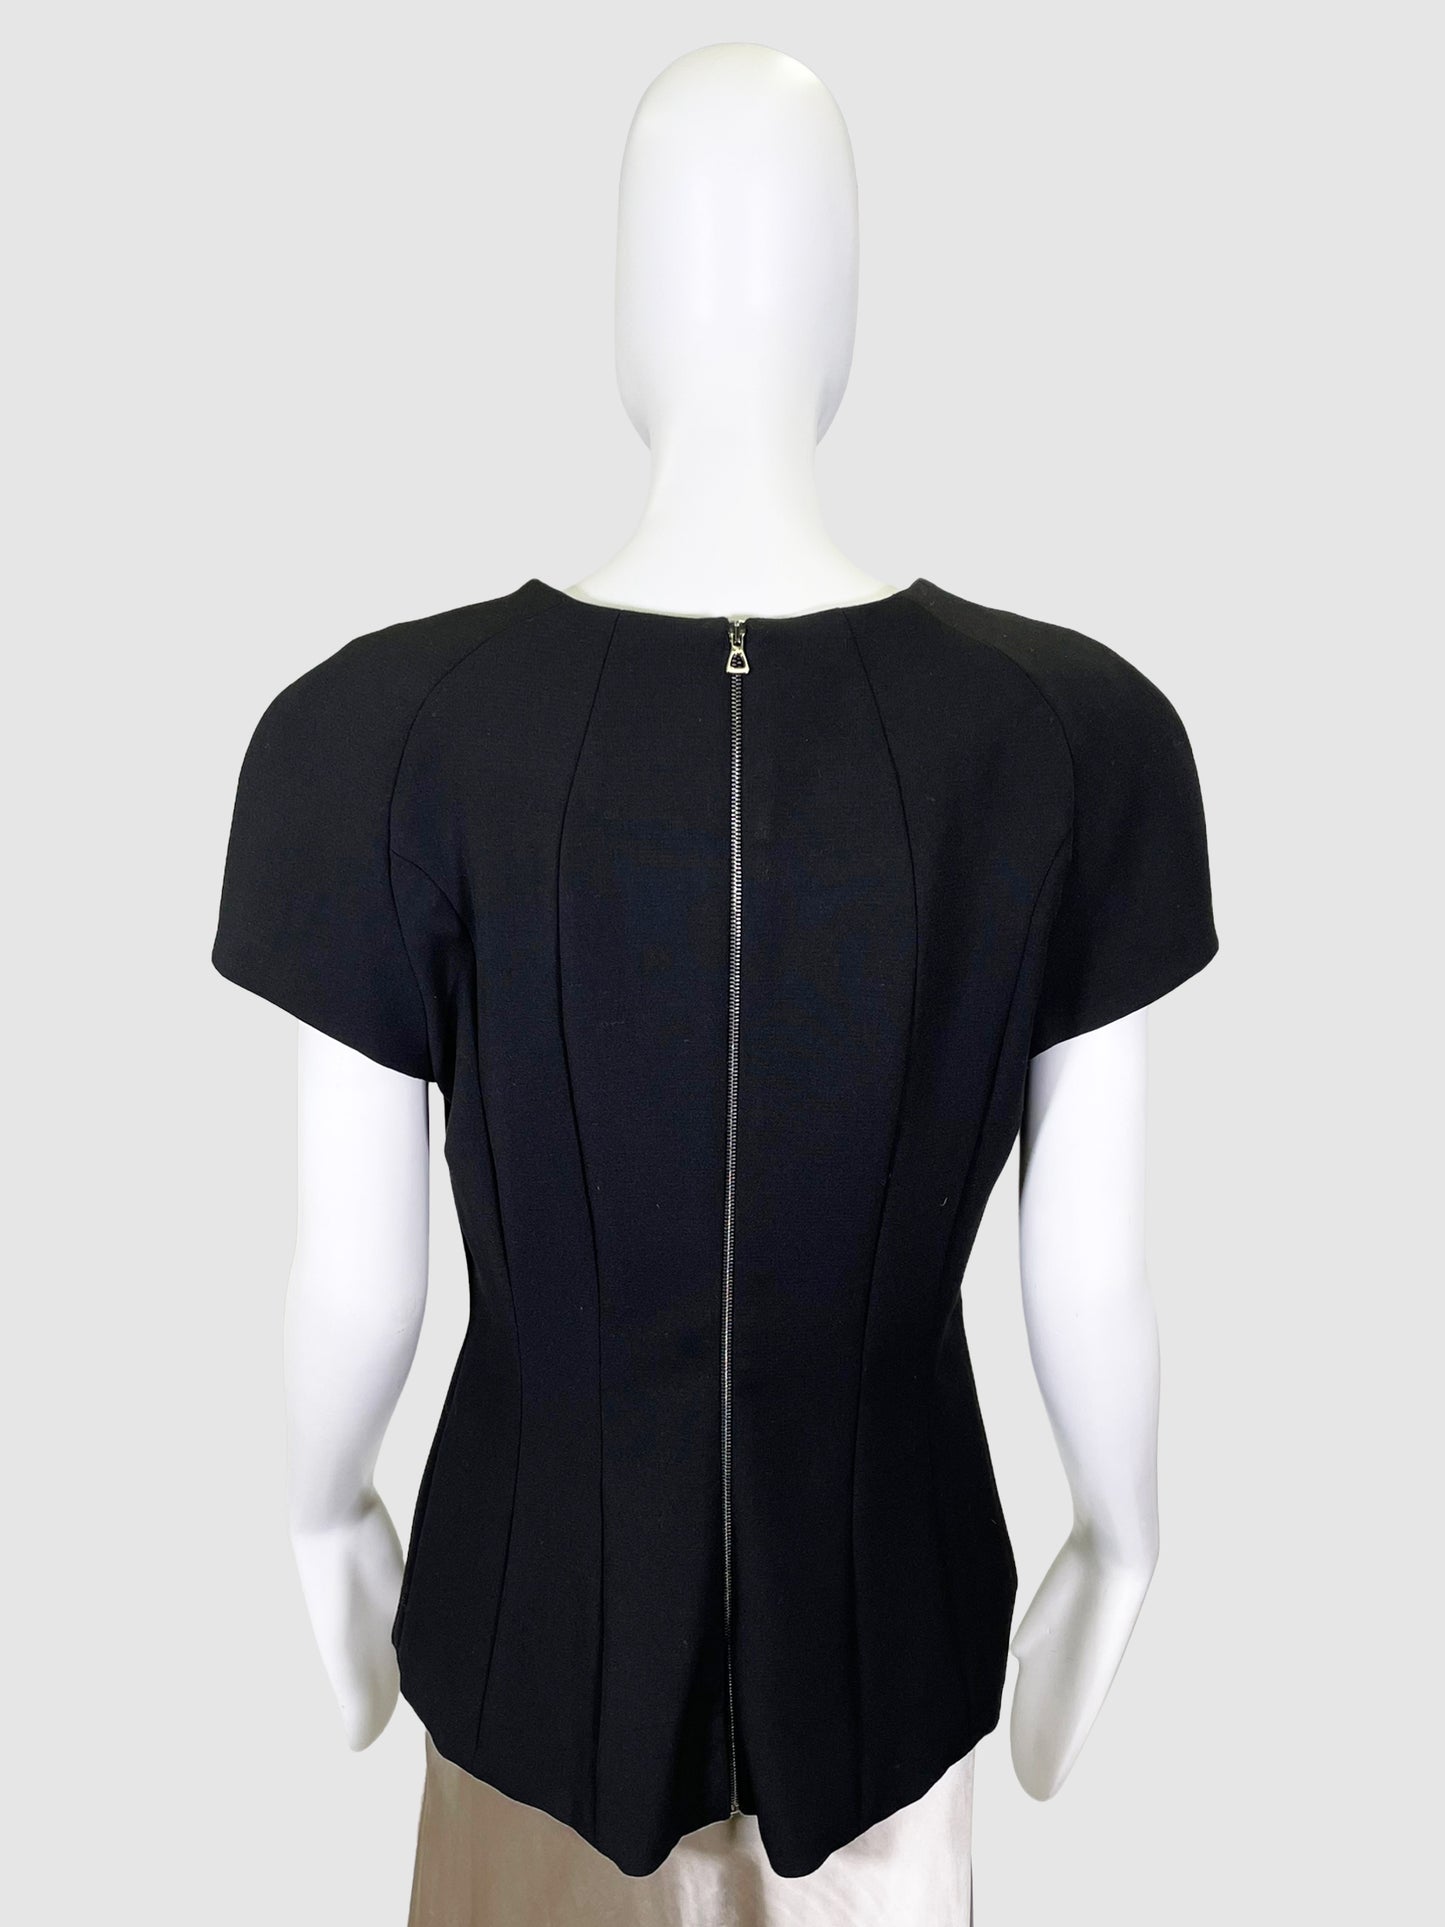 L'Agence Tailored Short Sleeve Blouse - Size 8